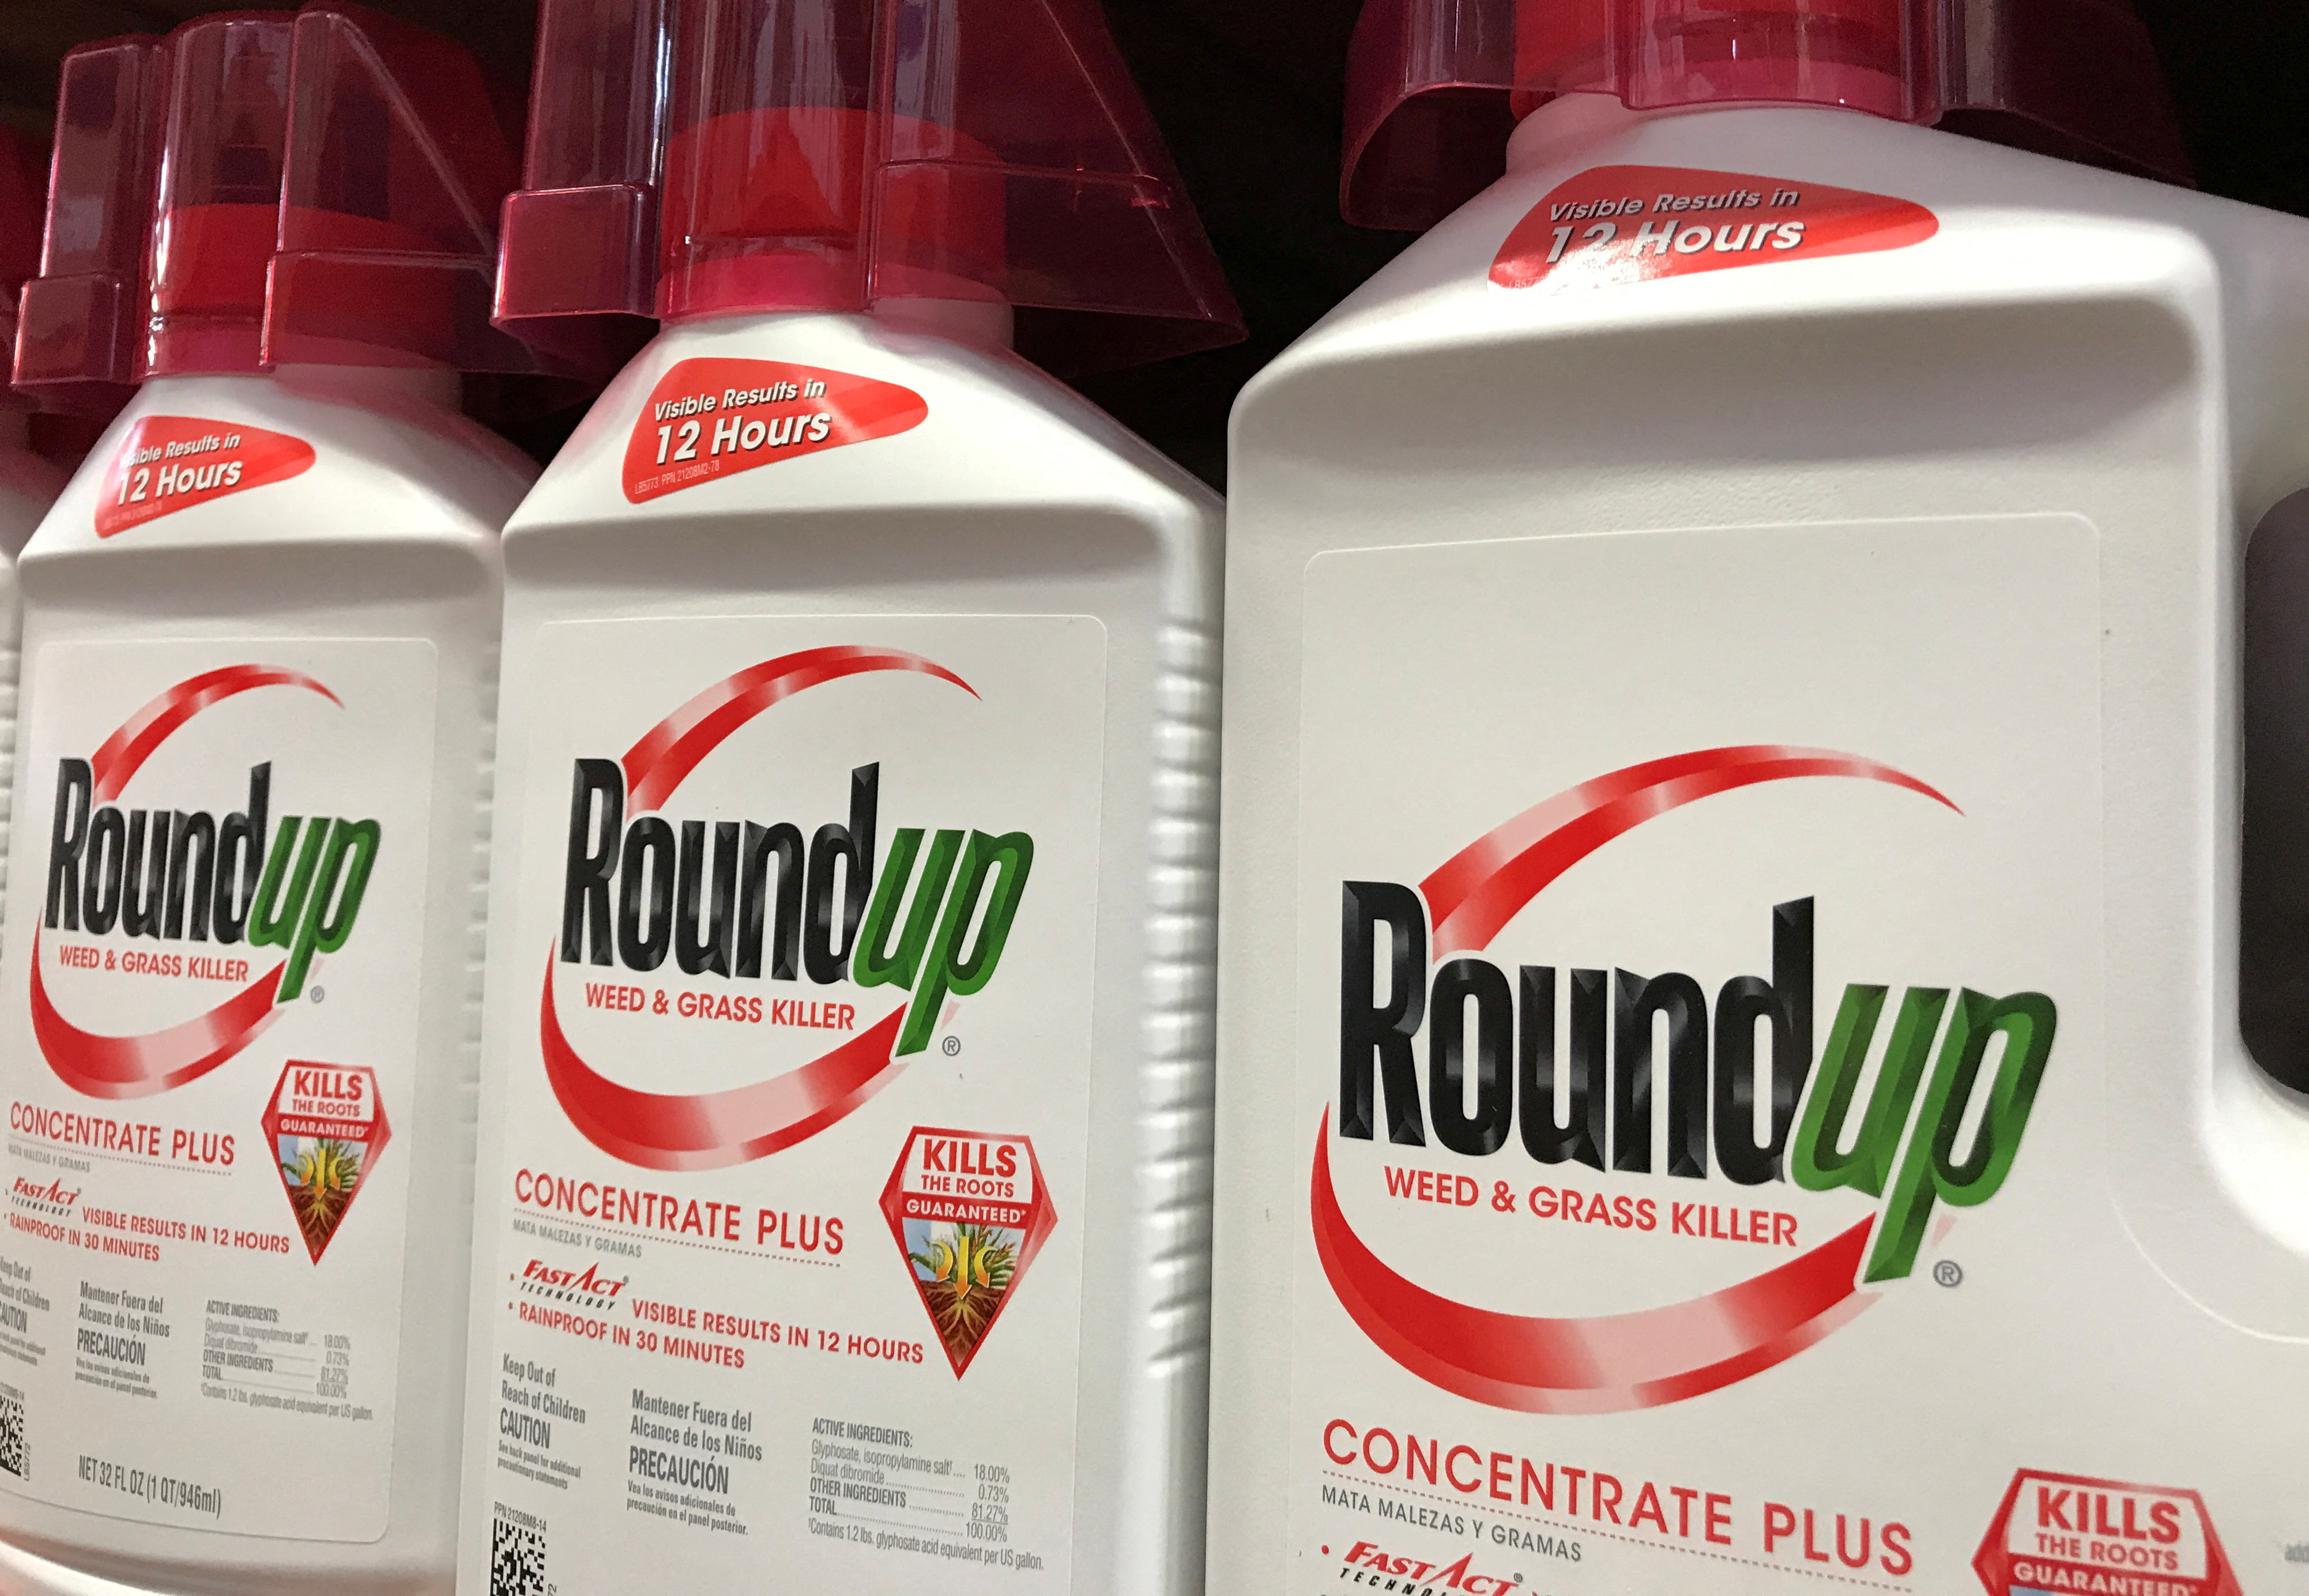 Appeals court blocks California warning requirement for glyphosate